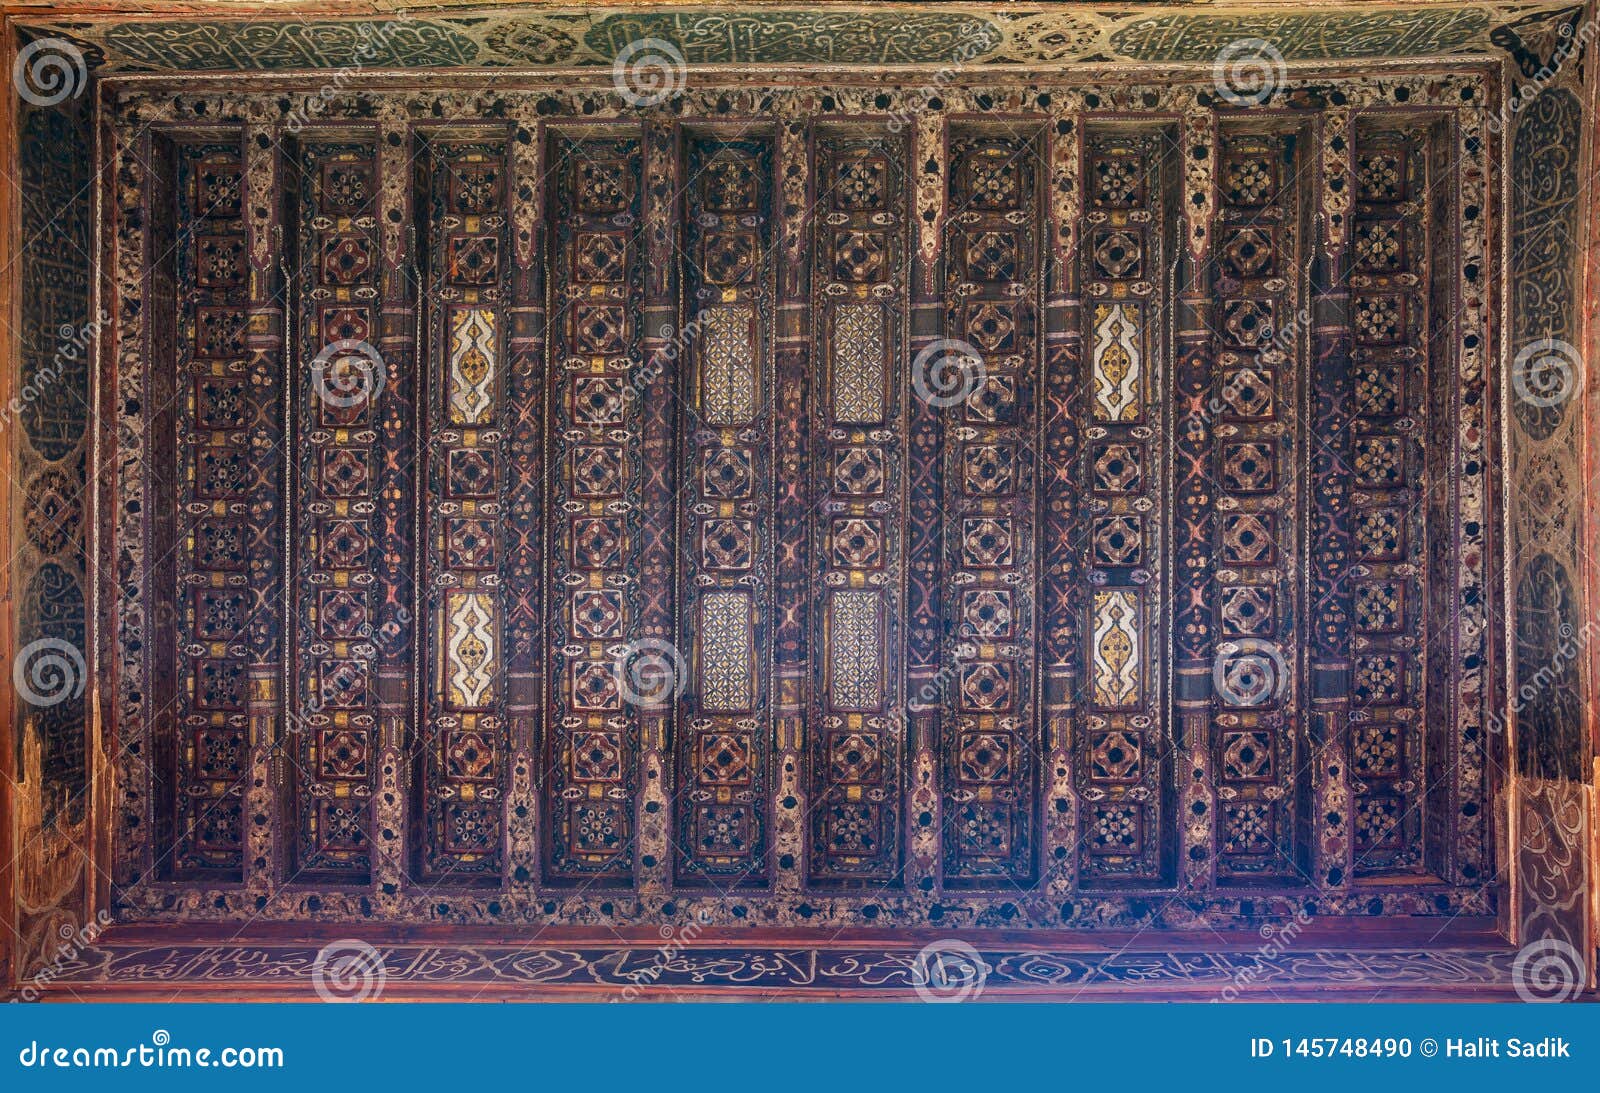 wooden ceiling decorated with floral pattern decorations at ottoman historic beit el set waseela buildingÃÅ old cairo, egypt